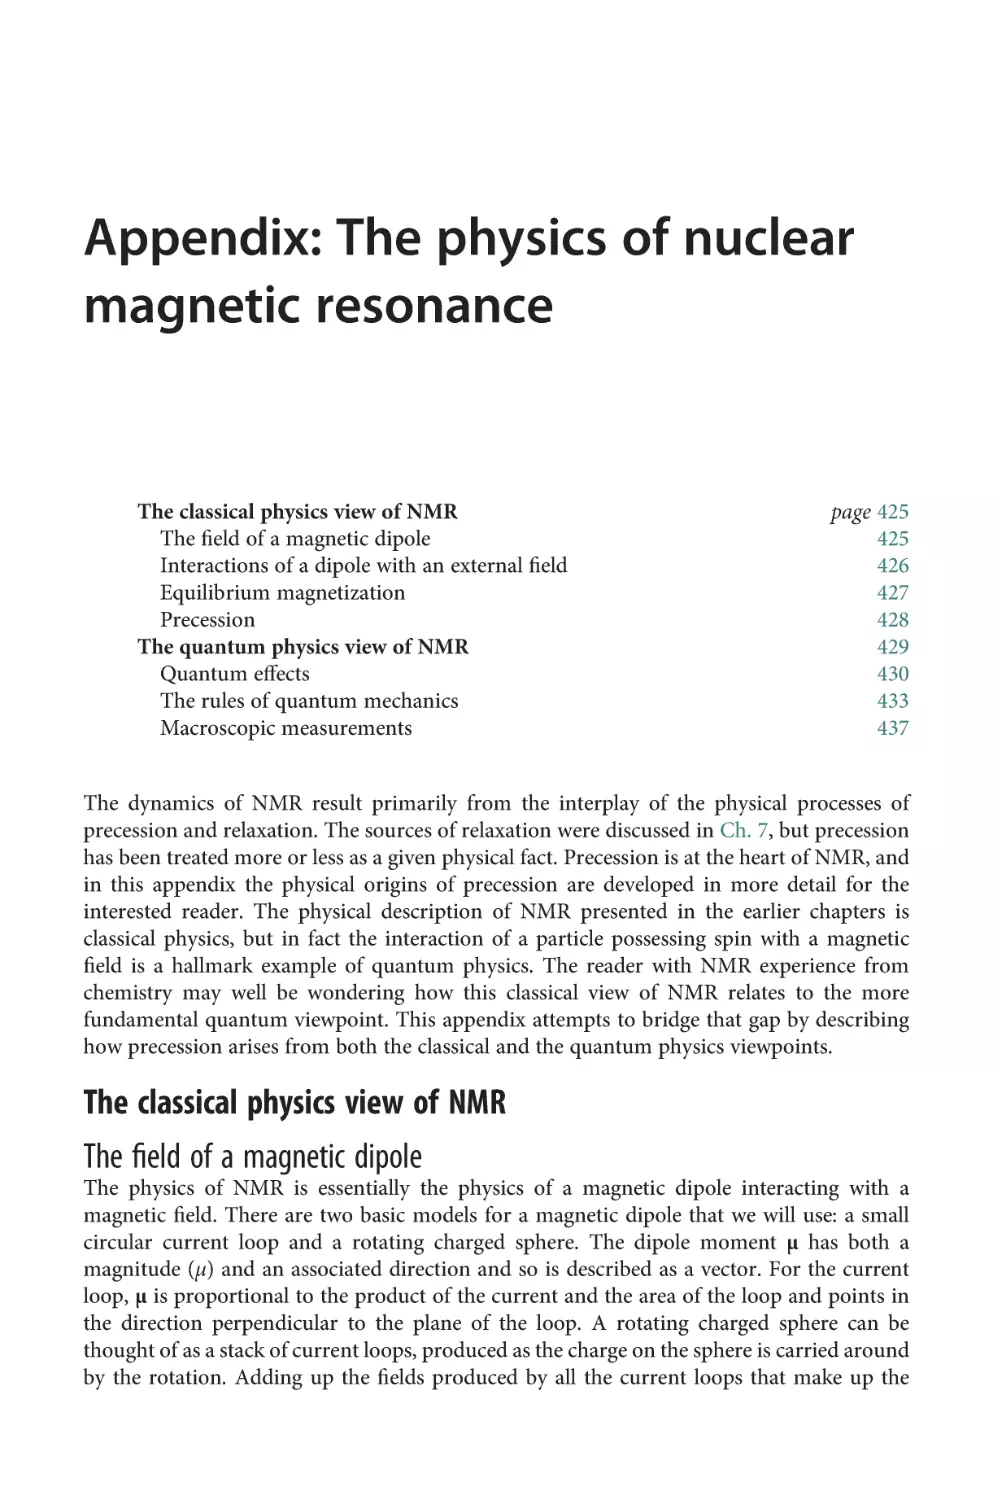 Appendix
The classical physics view of NMR
The field of a magnetic dipole